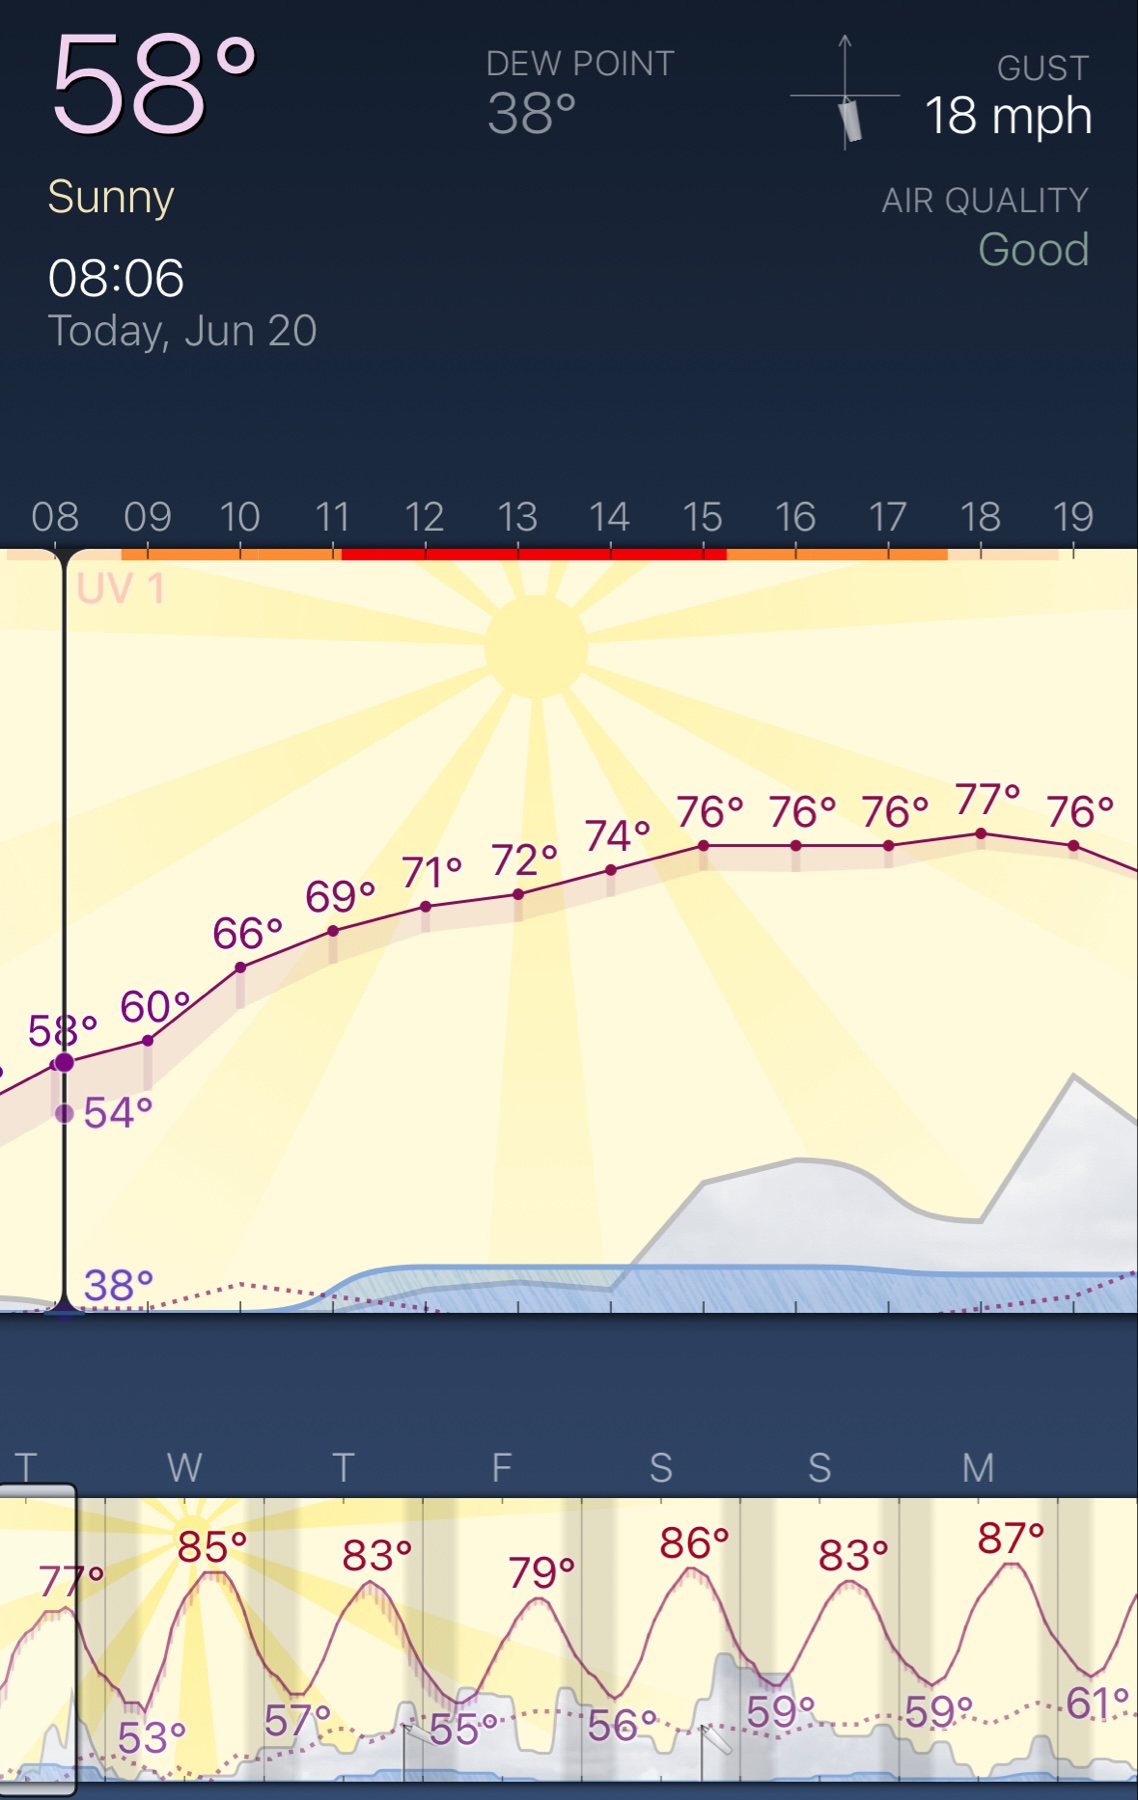 A Weather Strip iOS appweather chart that shows unusually cool June weather with lows in the 50s and highs in the low 70s and 80s.